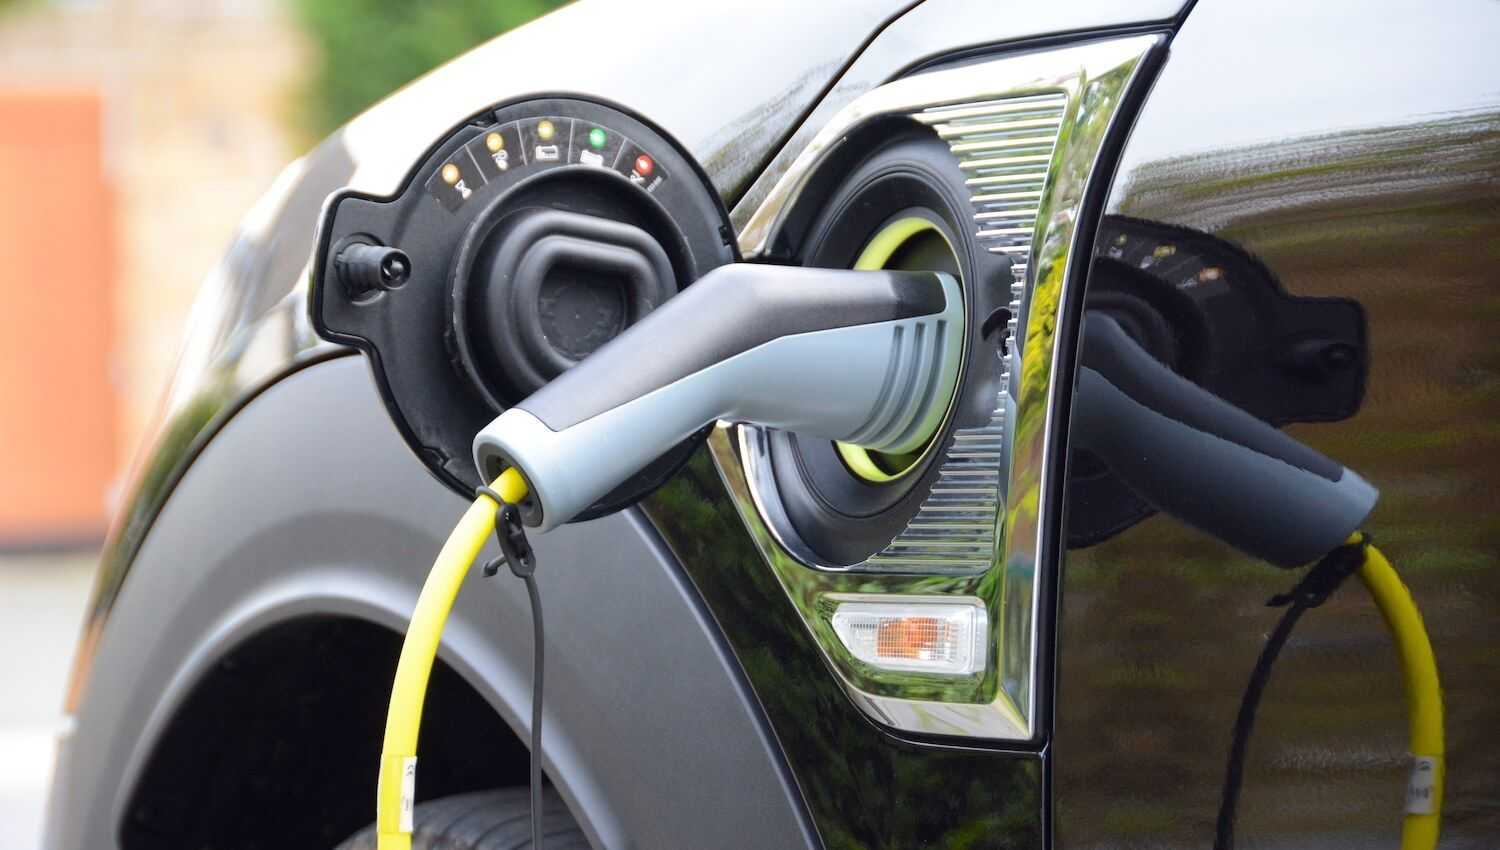 Everyday Electrics: 8 Best Low Emission Cars For 2021